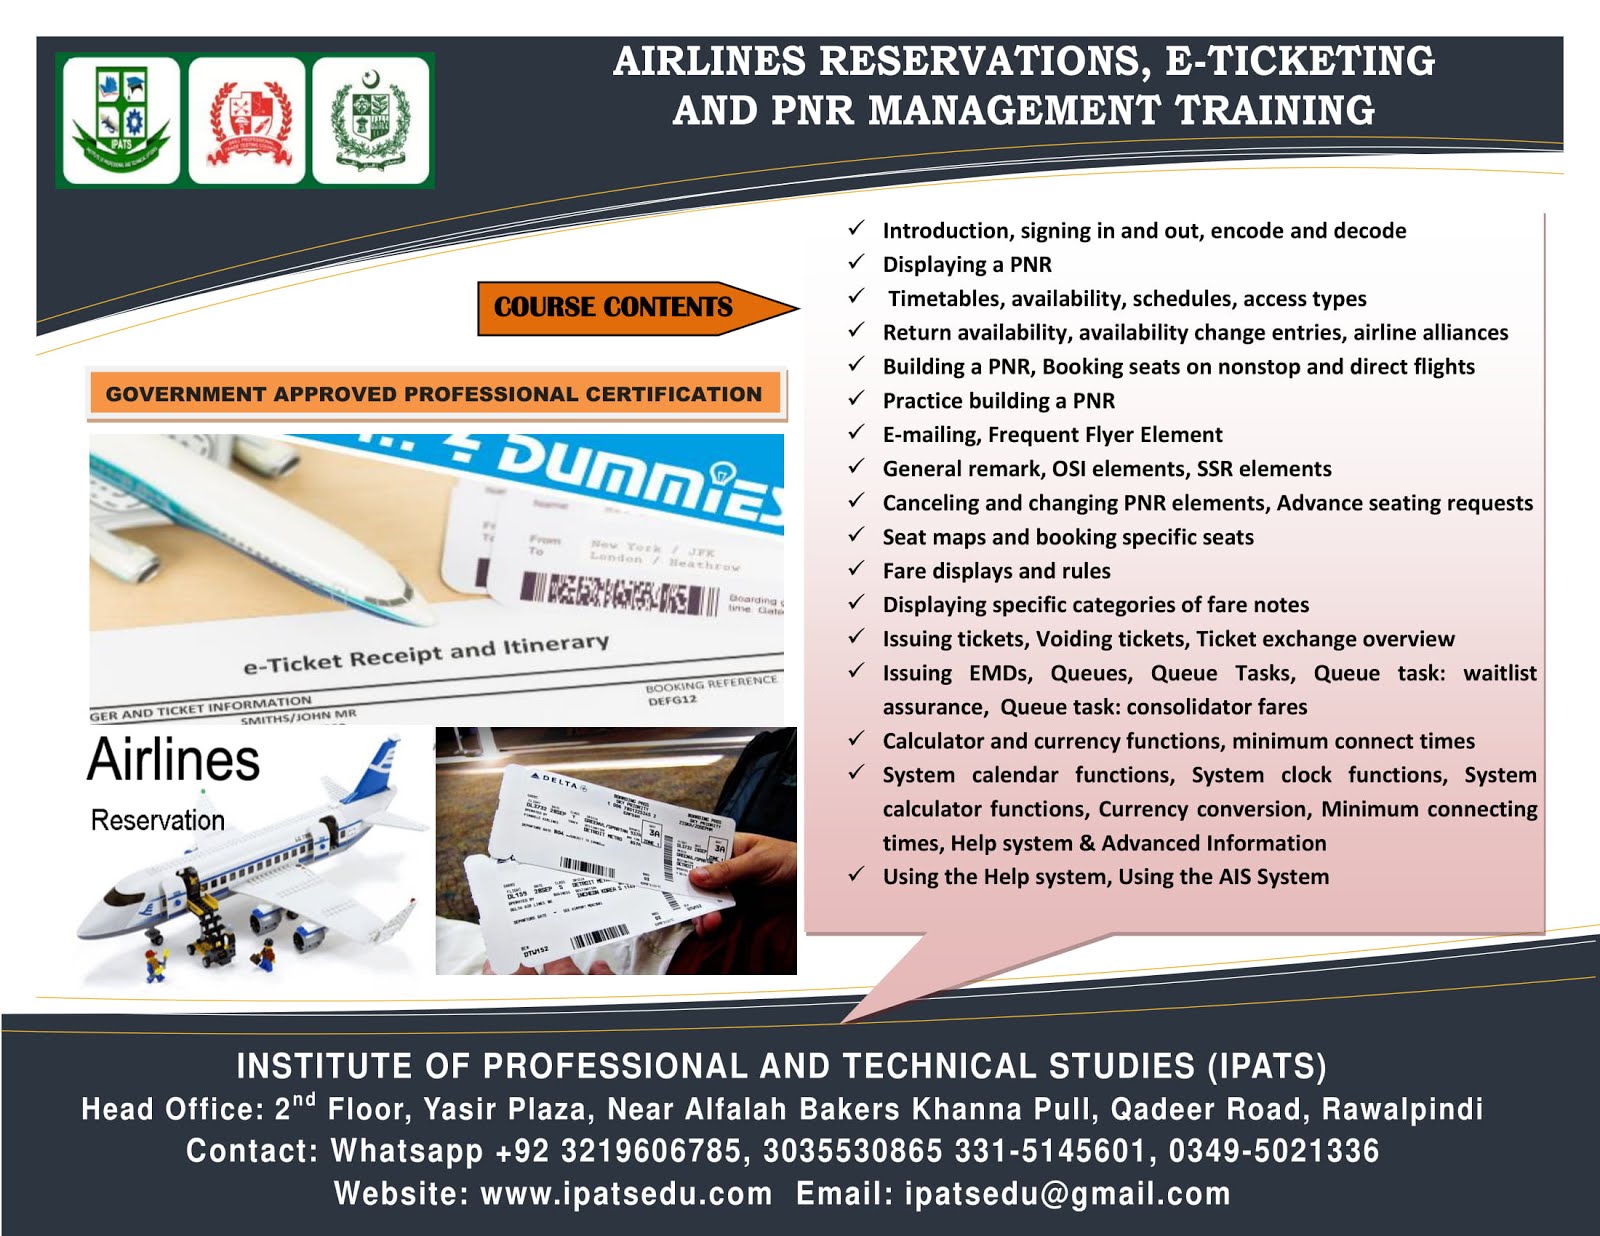 Airlines Reservations, eTicketing & PNR Management Training course outline: